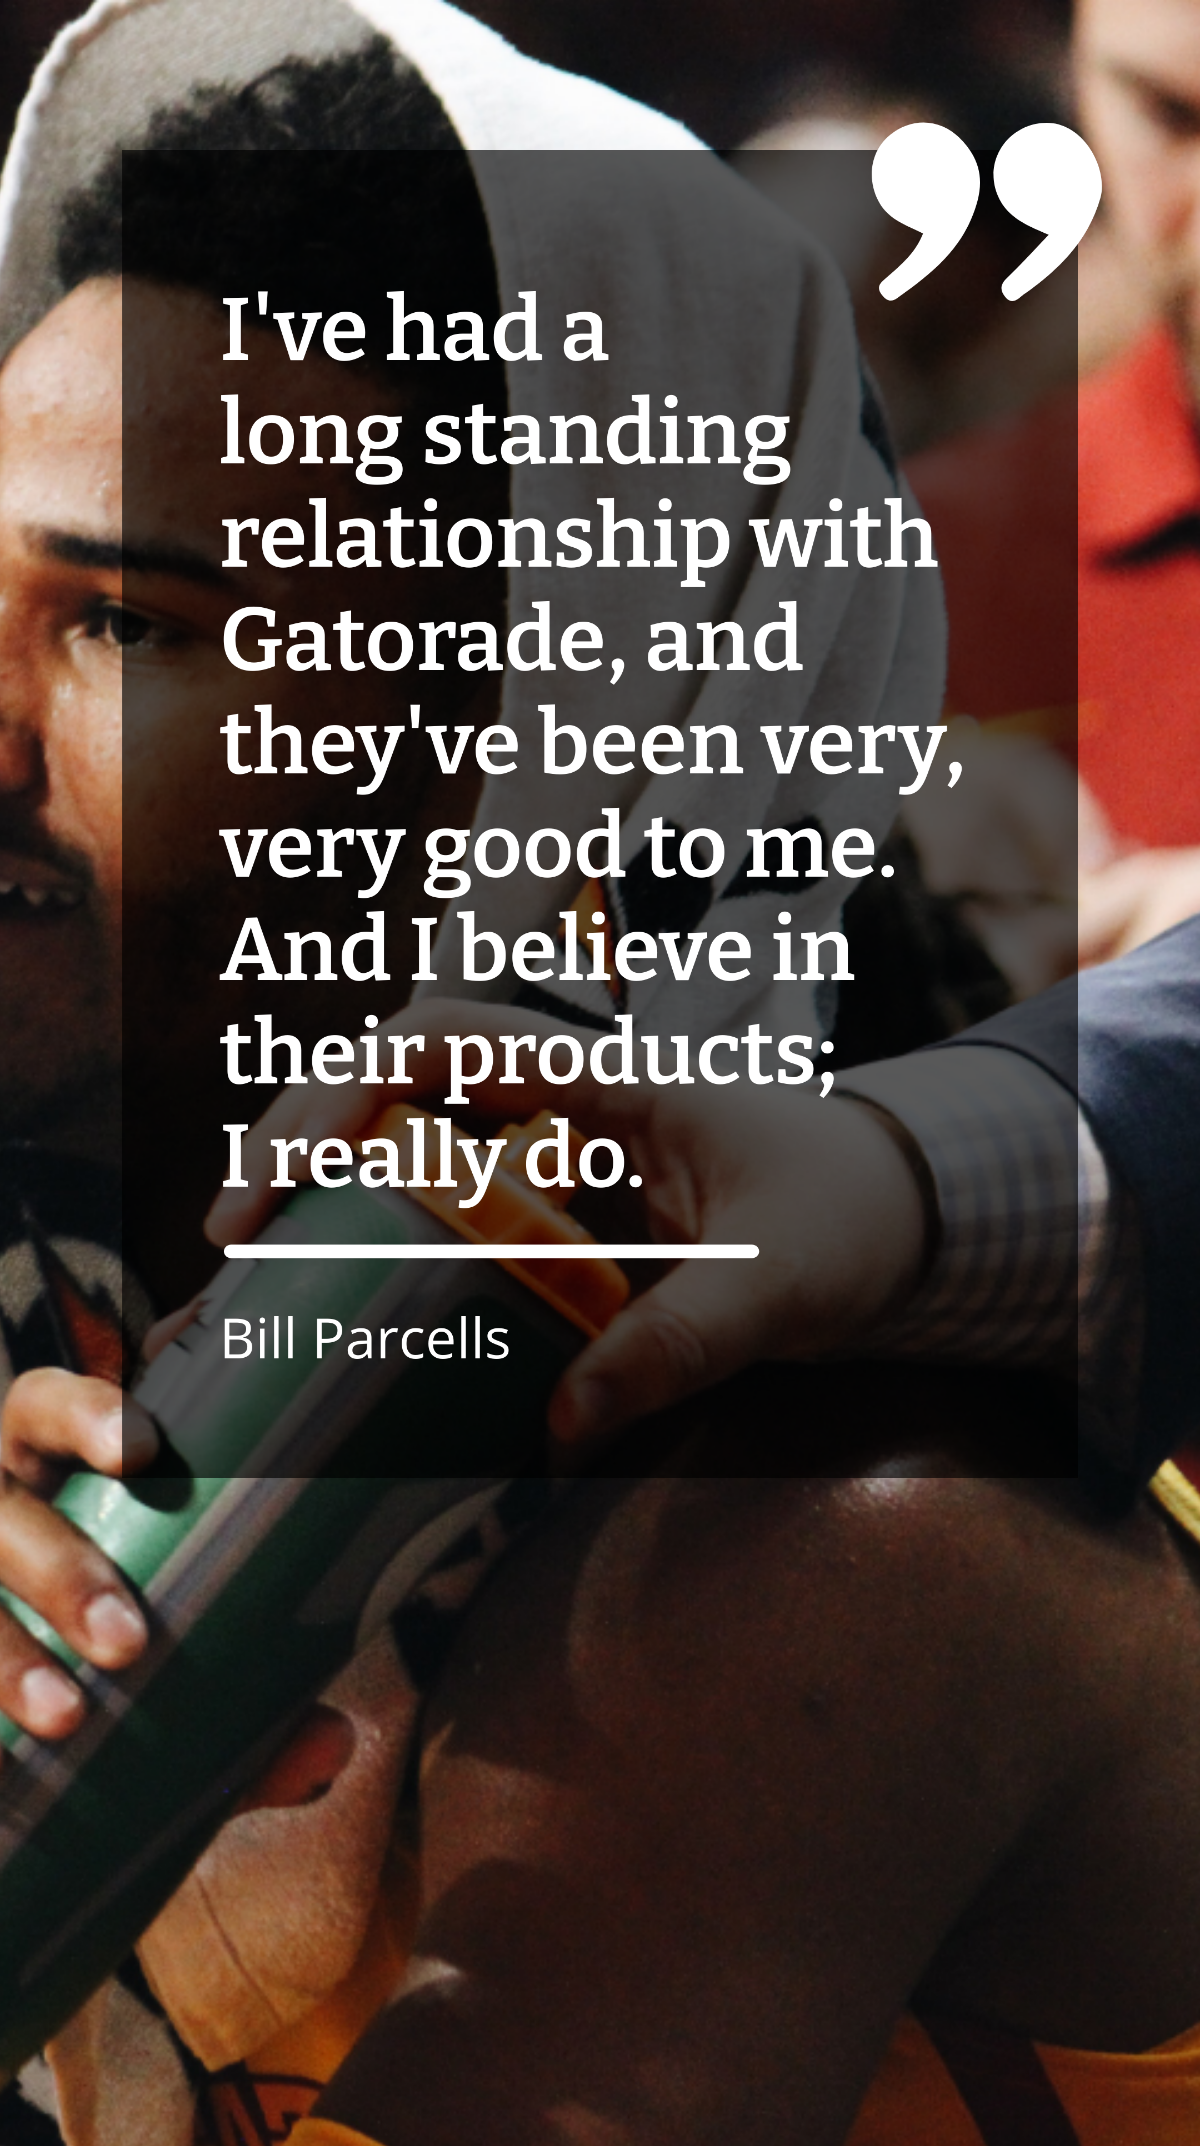 Bill Parcells - I've had a long standing relationship with Gatorade, and they've been very, very good to me. And I believe in their products; I really do. Template